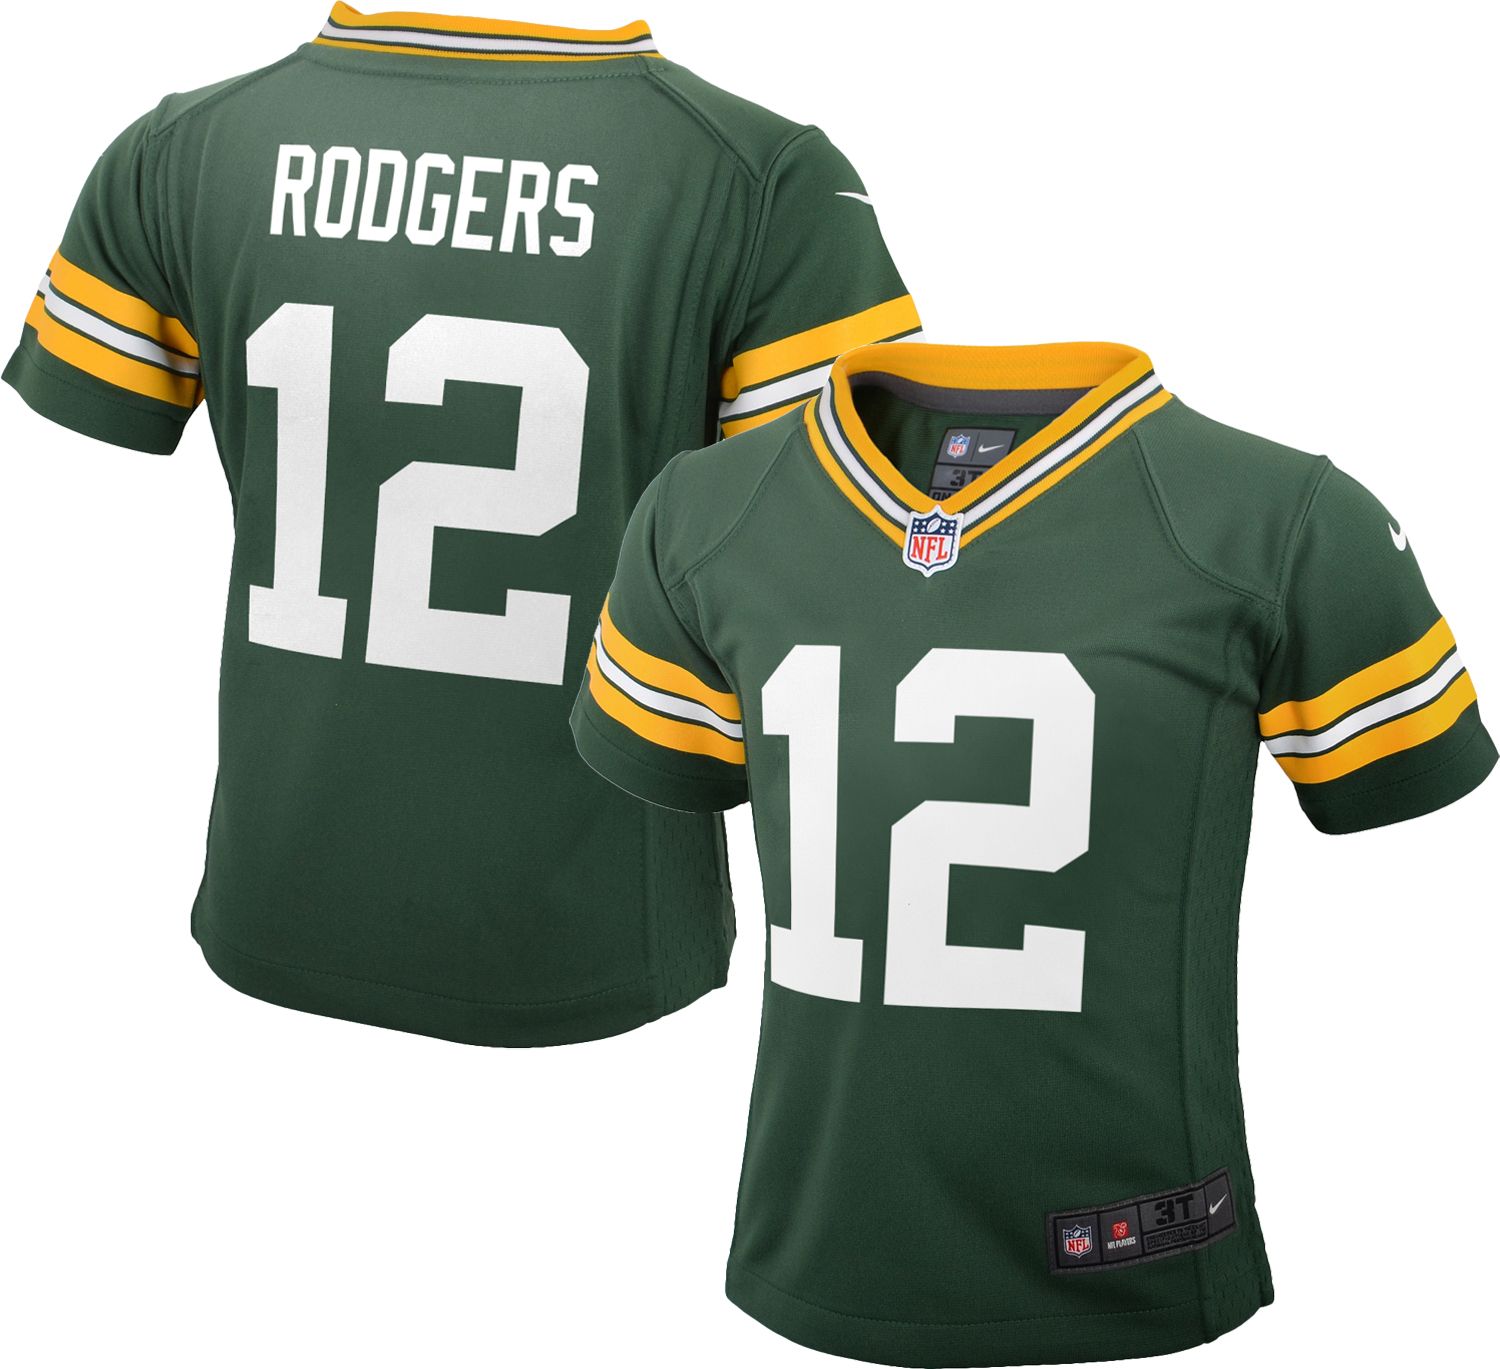 4t packers jersey